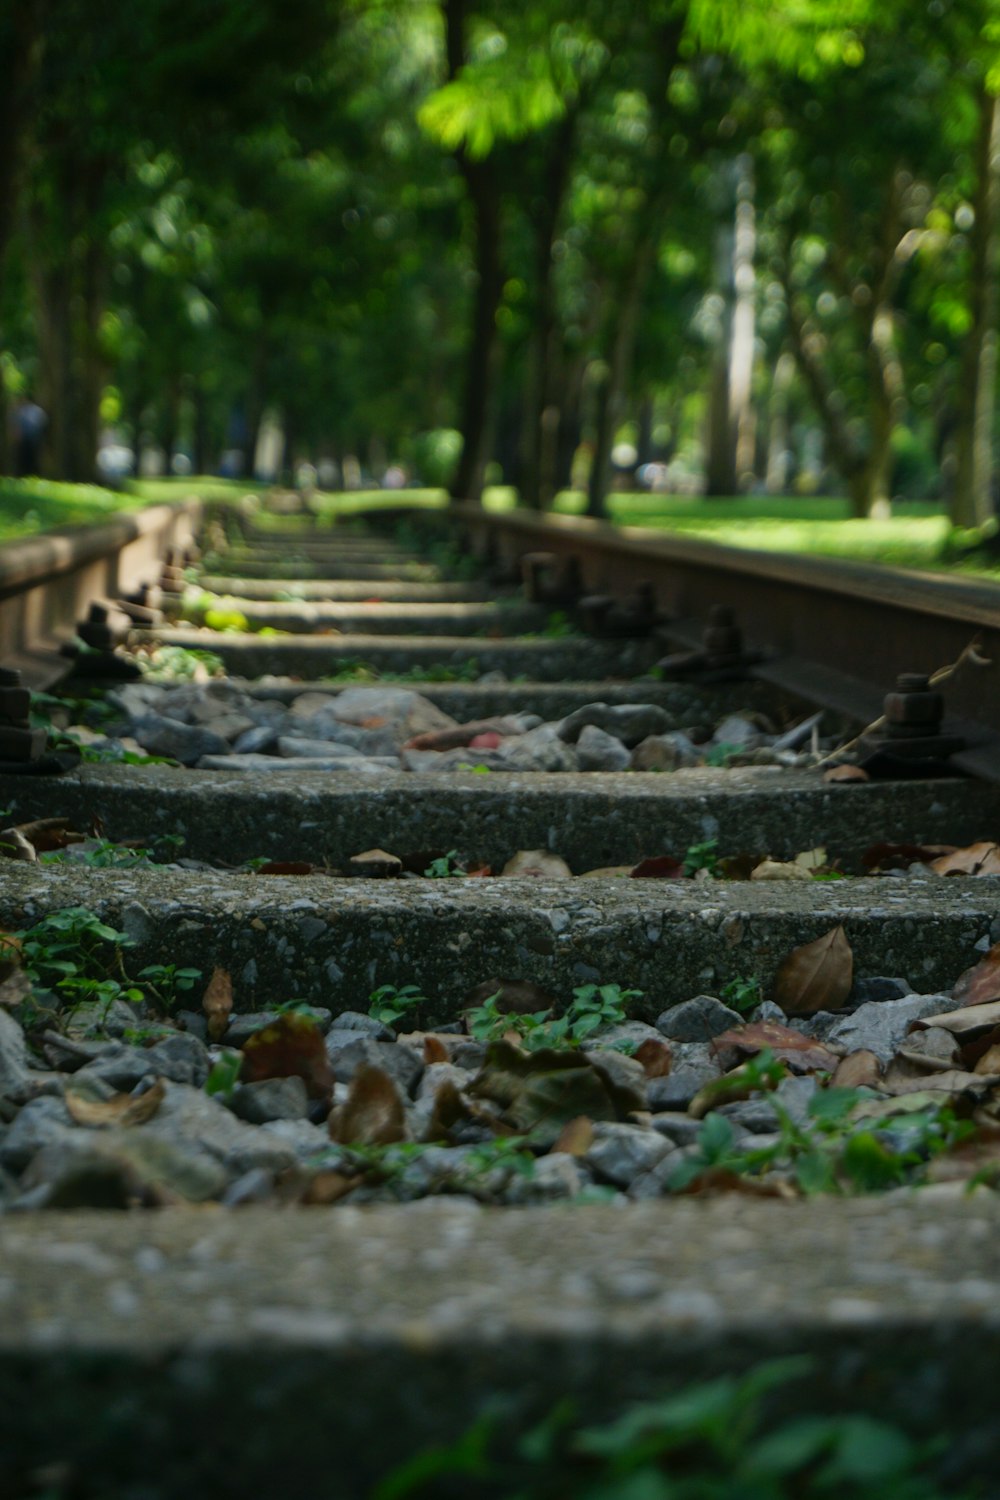 a train track with leaves on the ground